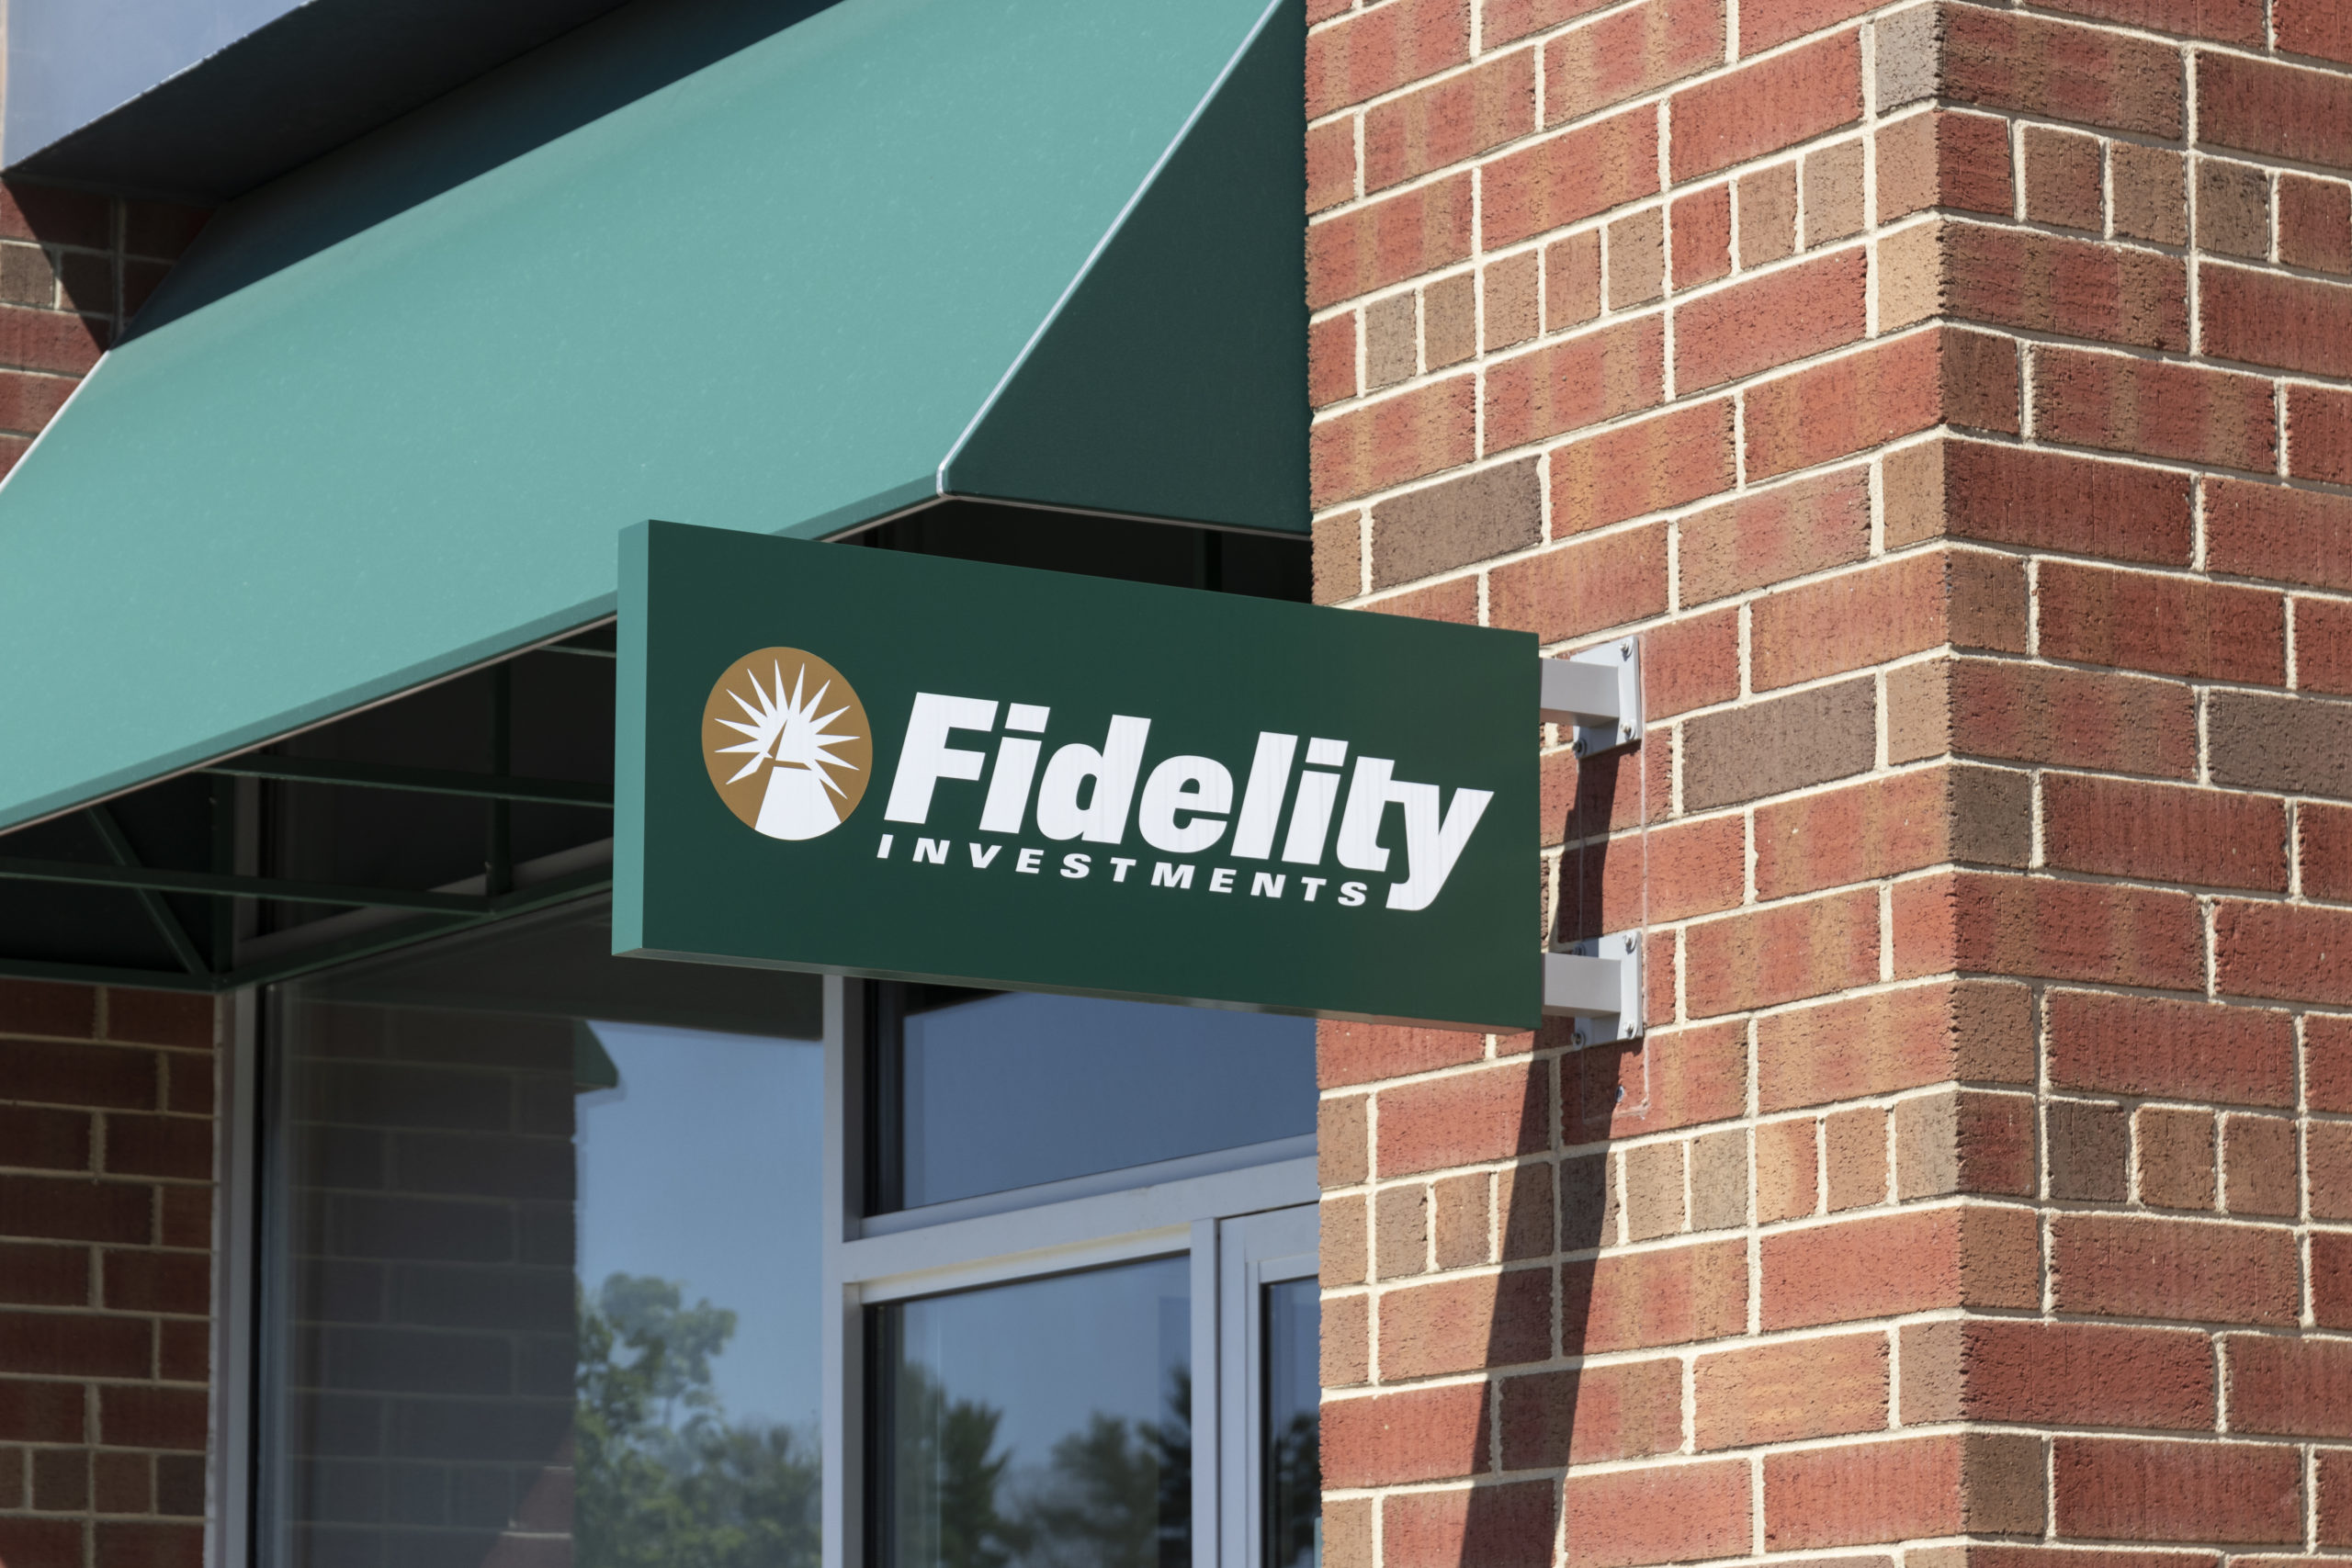 fidelity investments logo scaled 1 Fidelity considers Bitcoin trading for brokerage clients- WSJ